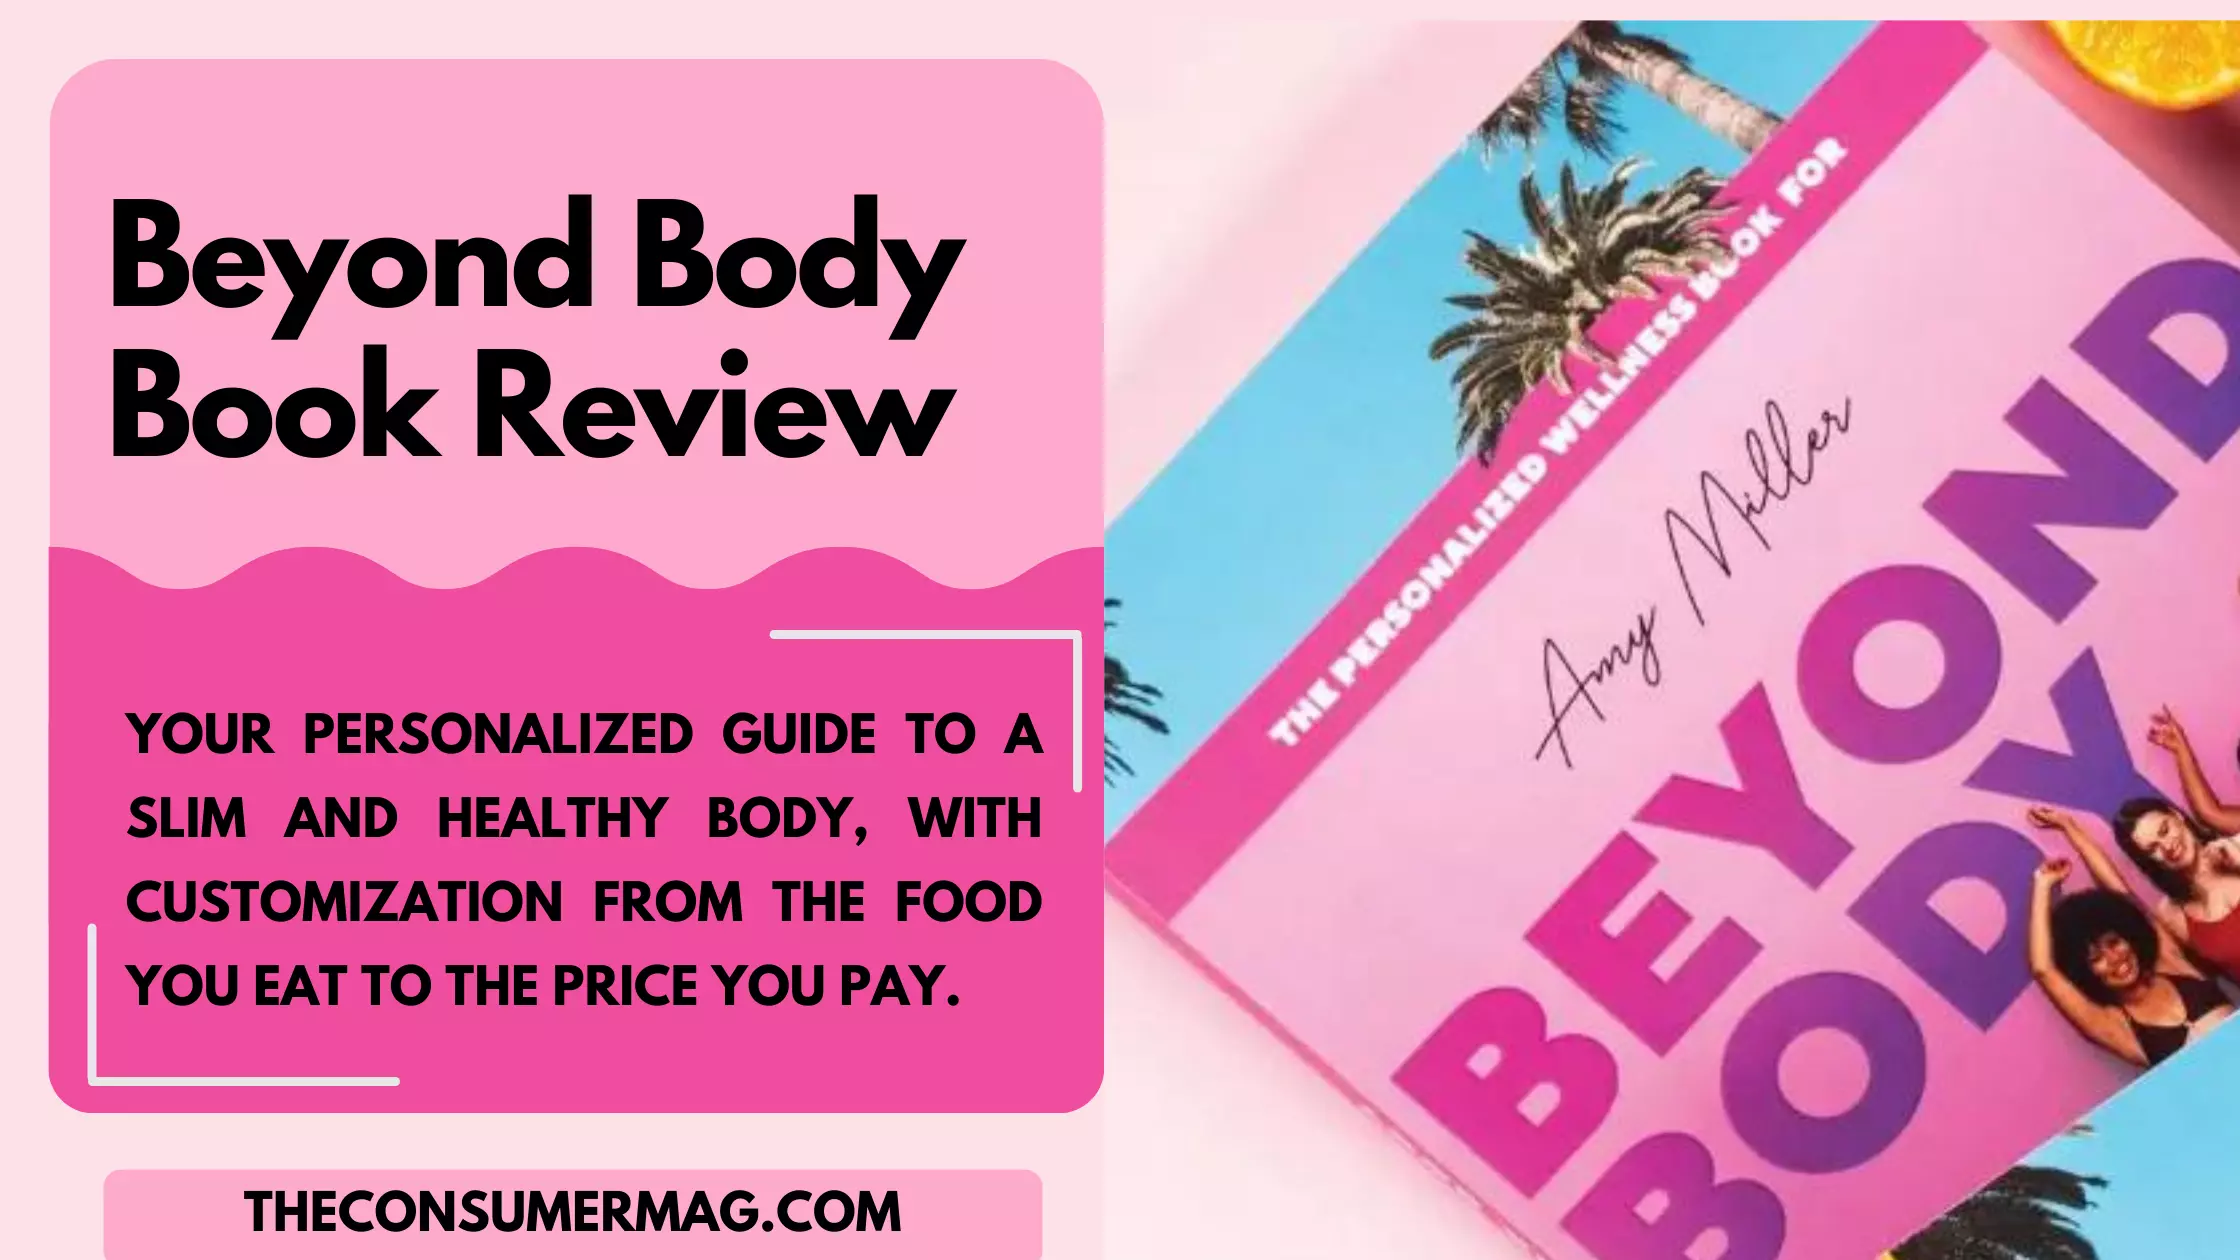 Beyond Body Featured Image